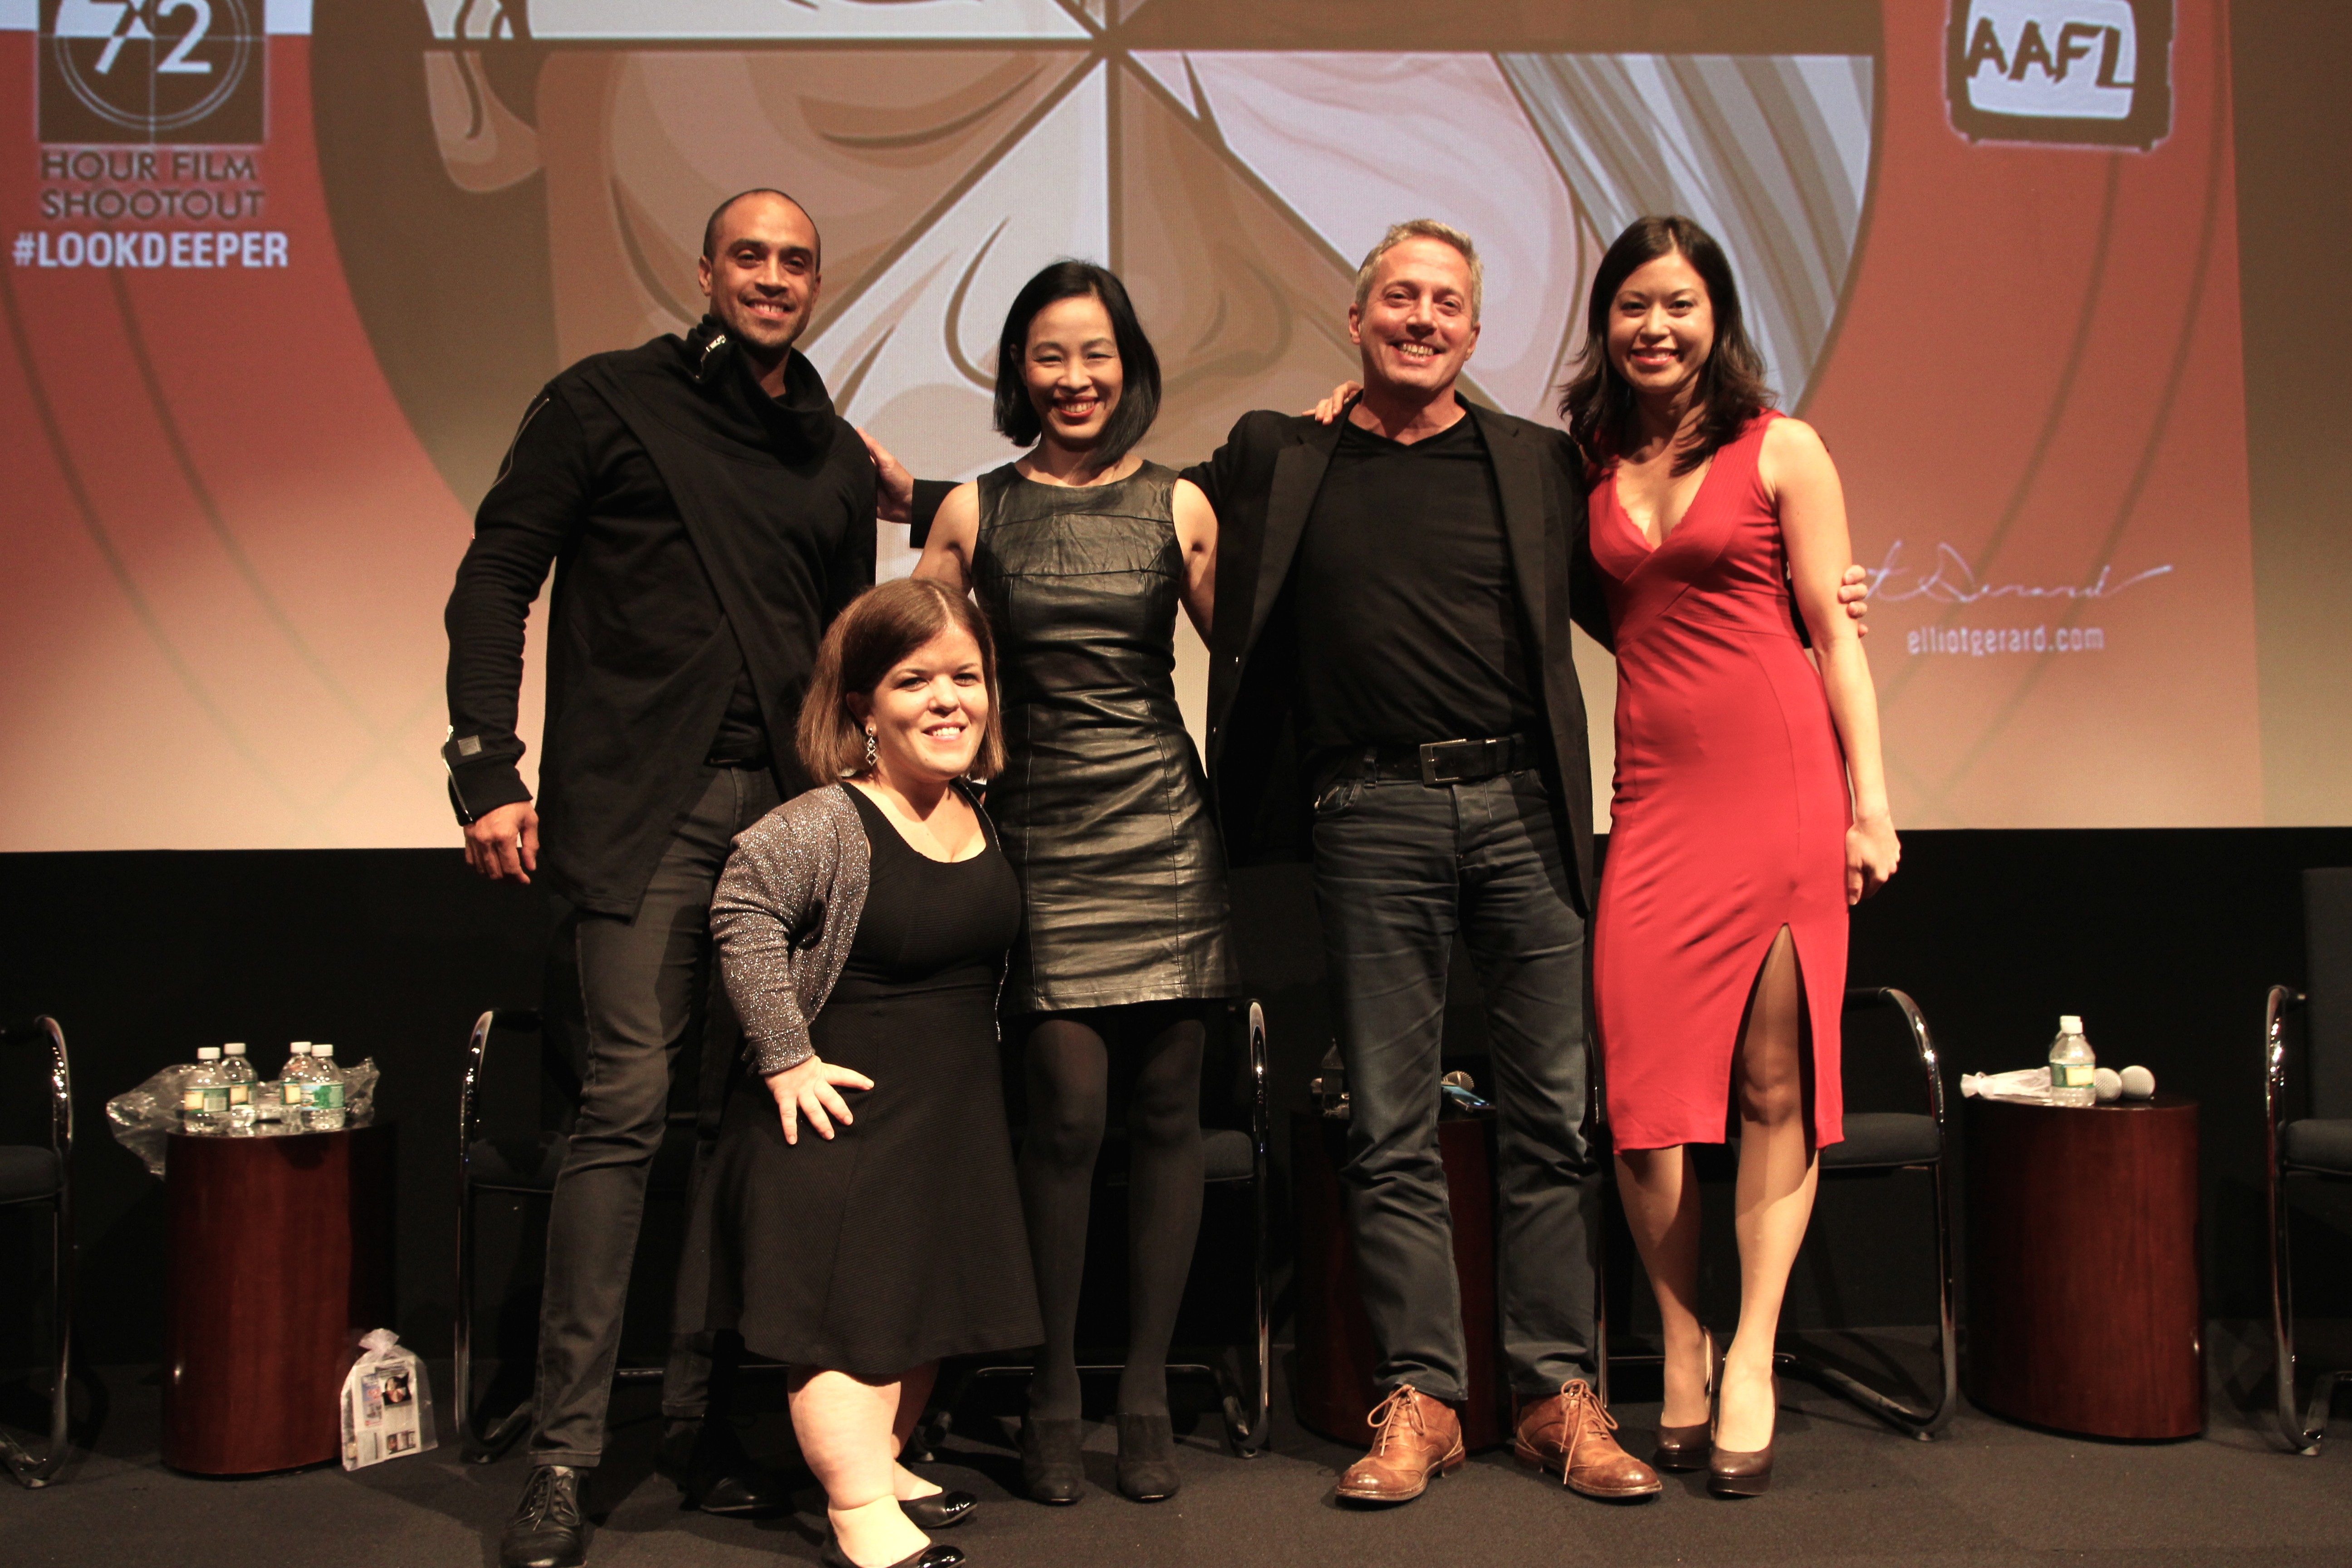 Blue Michael, Becky Curran, Lia Chang, Rick Guidotti and Jennifer Betit Yen attend a special screening of 72 Hour Shootout films and panel discussion at the Time Warner Theater in New York on October 7, 2015. Photo by GK